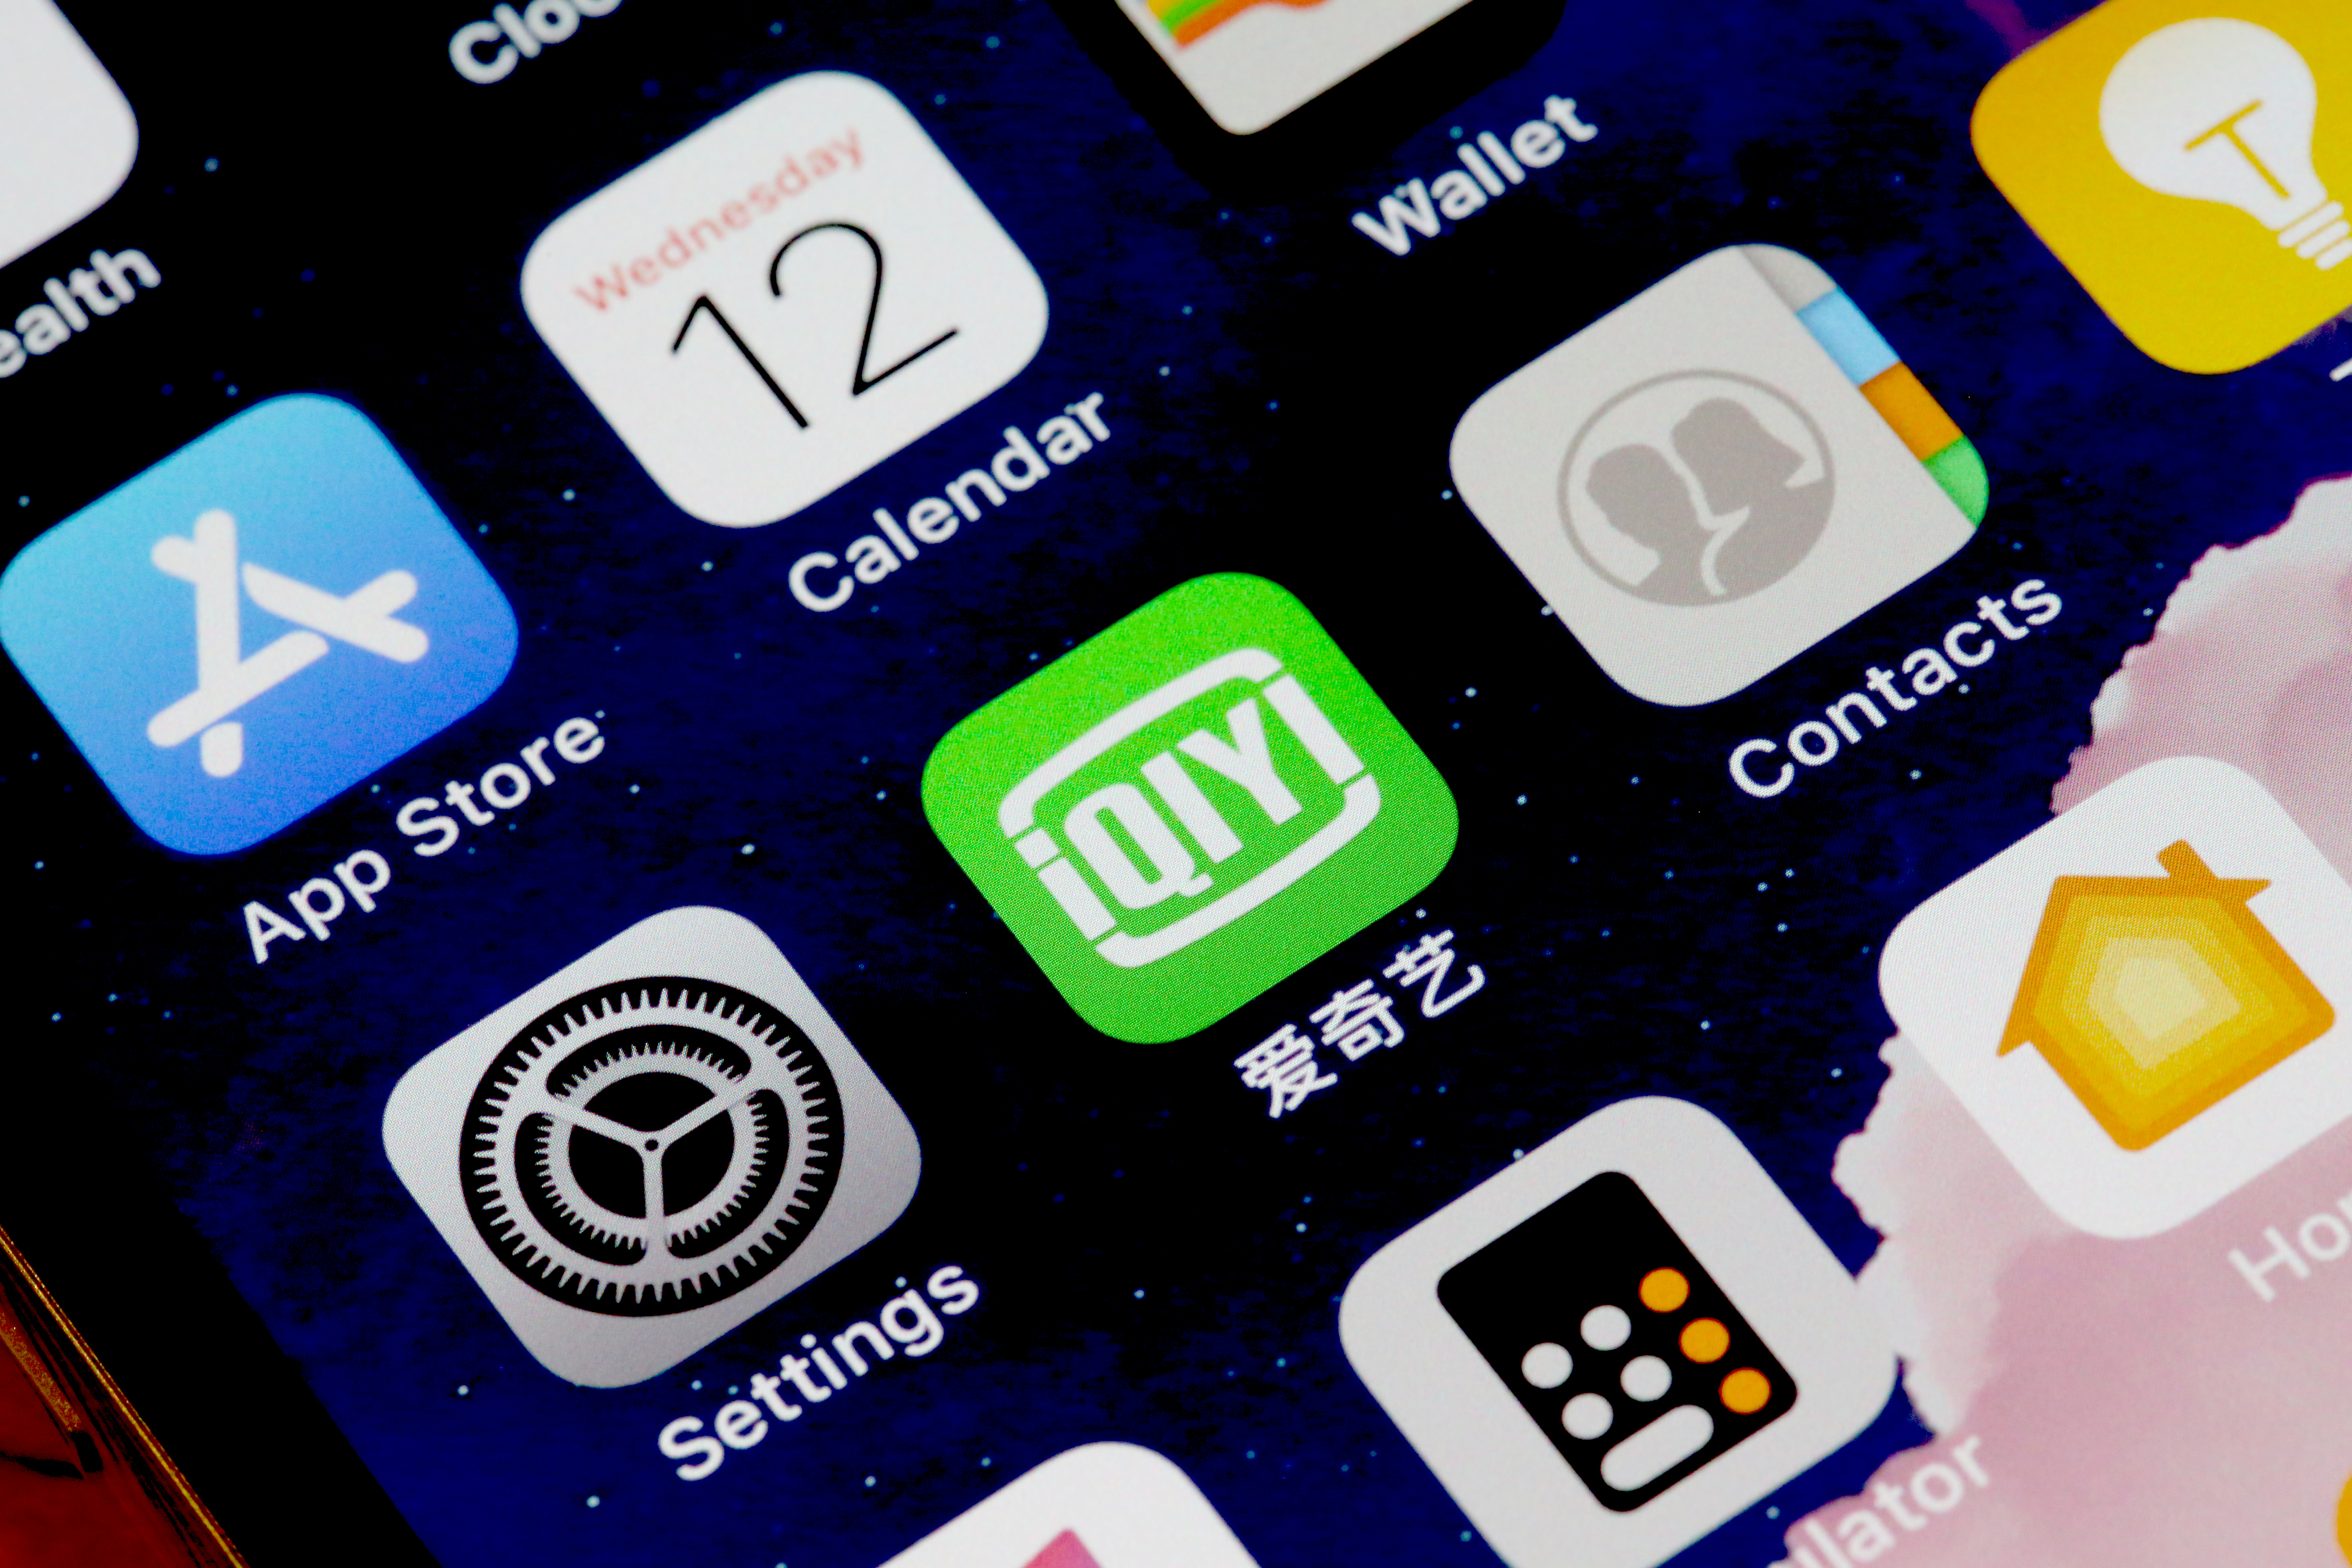 iQiyi is selling bonds and shares to boost growth amid tightening liquidity